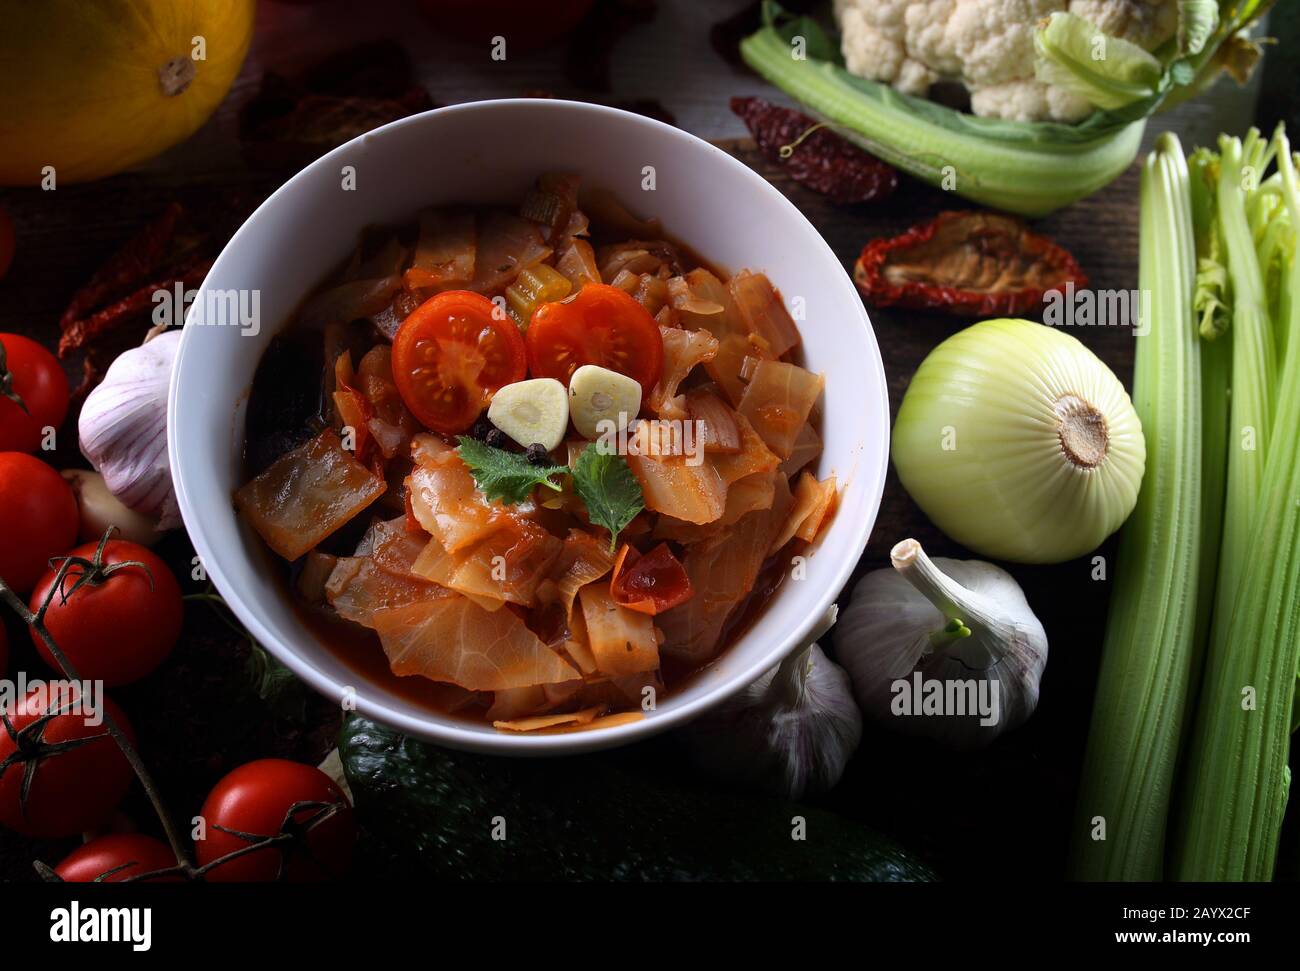 Vegetable soup with many green vegetables Stock Photo